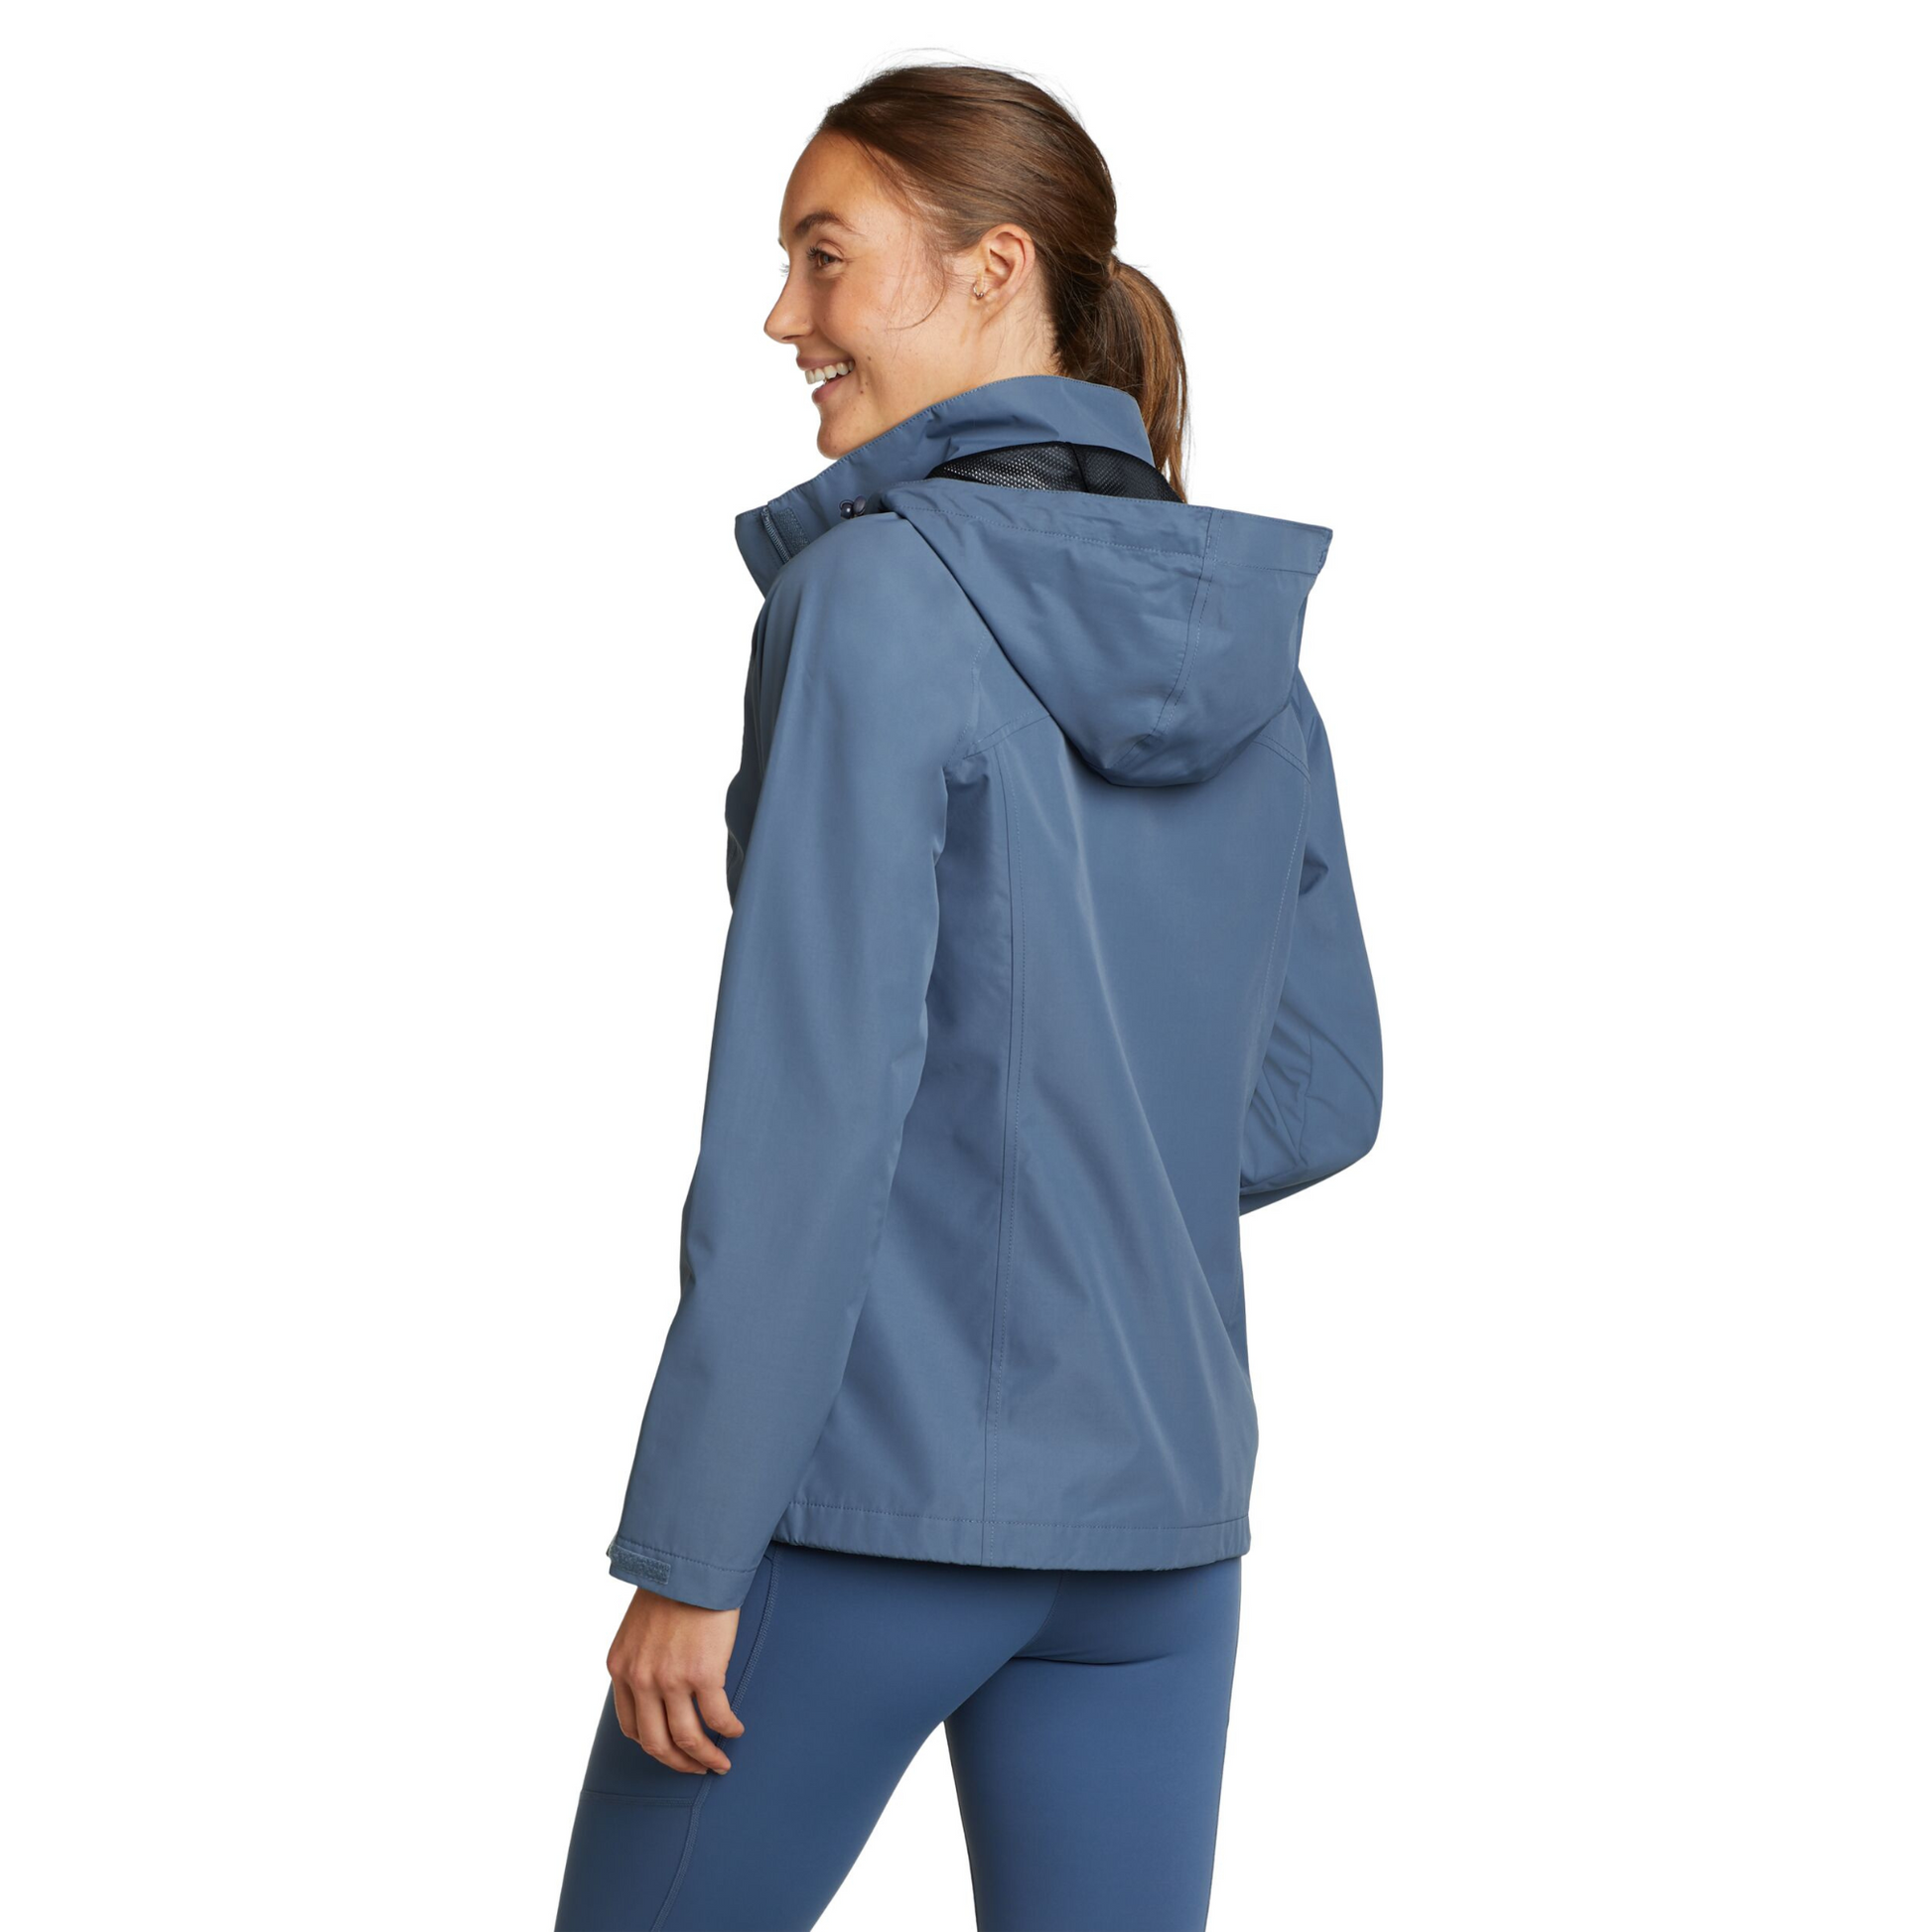 Chaqueta Rainfoil Packable Eddie Bauer Mujer Azul | Outdoor Adventure Colombia